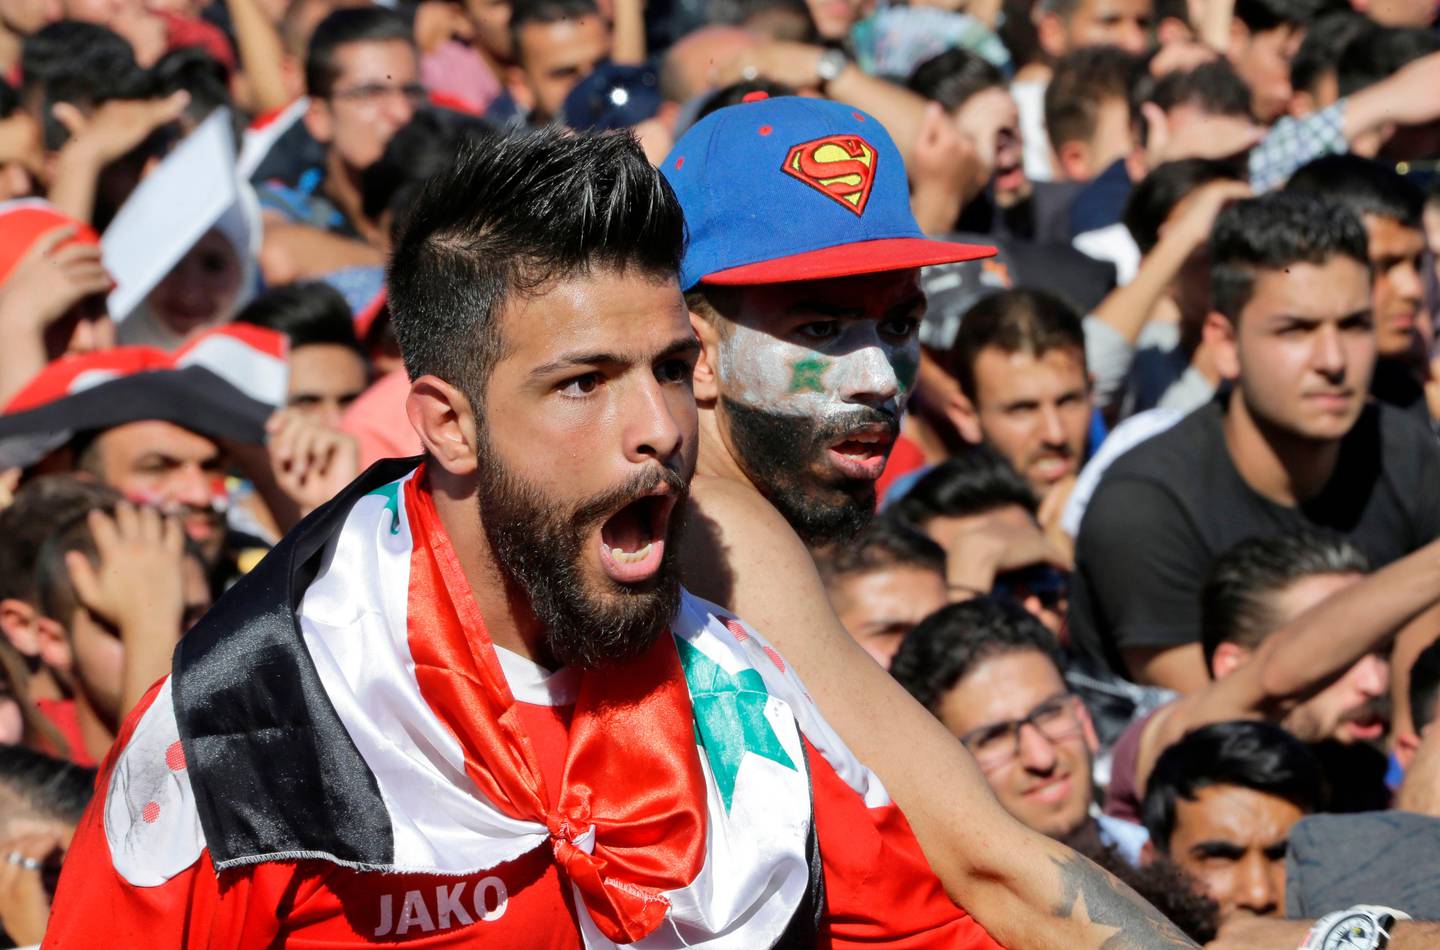 Syrians cheer on their national team at the Umayyad Square in Damascus as they watch a live broadcast of the World Cup 2018 qualifying play-off football match between Syria and Australia on October 10, 2017.
Australia's veteran striker Tim Cahill scored deep into extra time to take Australia a big step closer to next year's World Cup and end war-torn Syria's fairytale run in the play-offs. / AFP PHOTO / LOUAI BESHARA